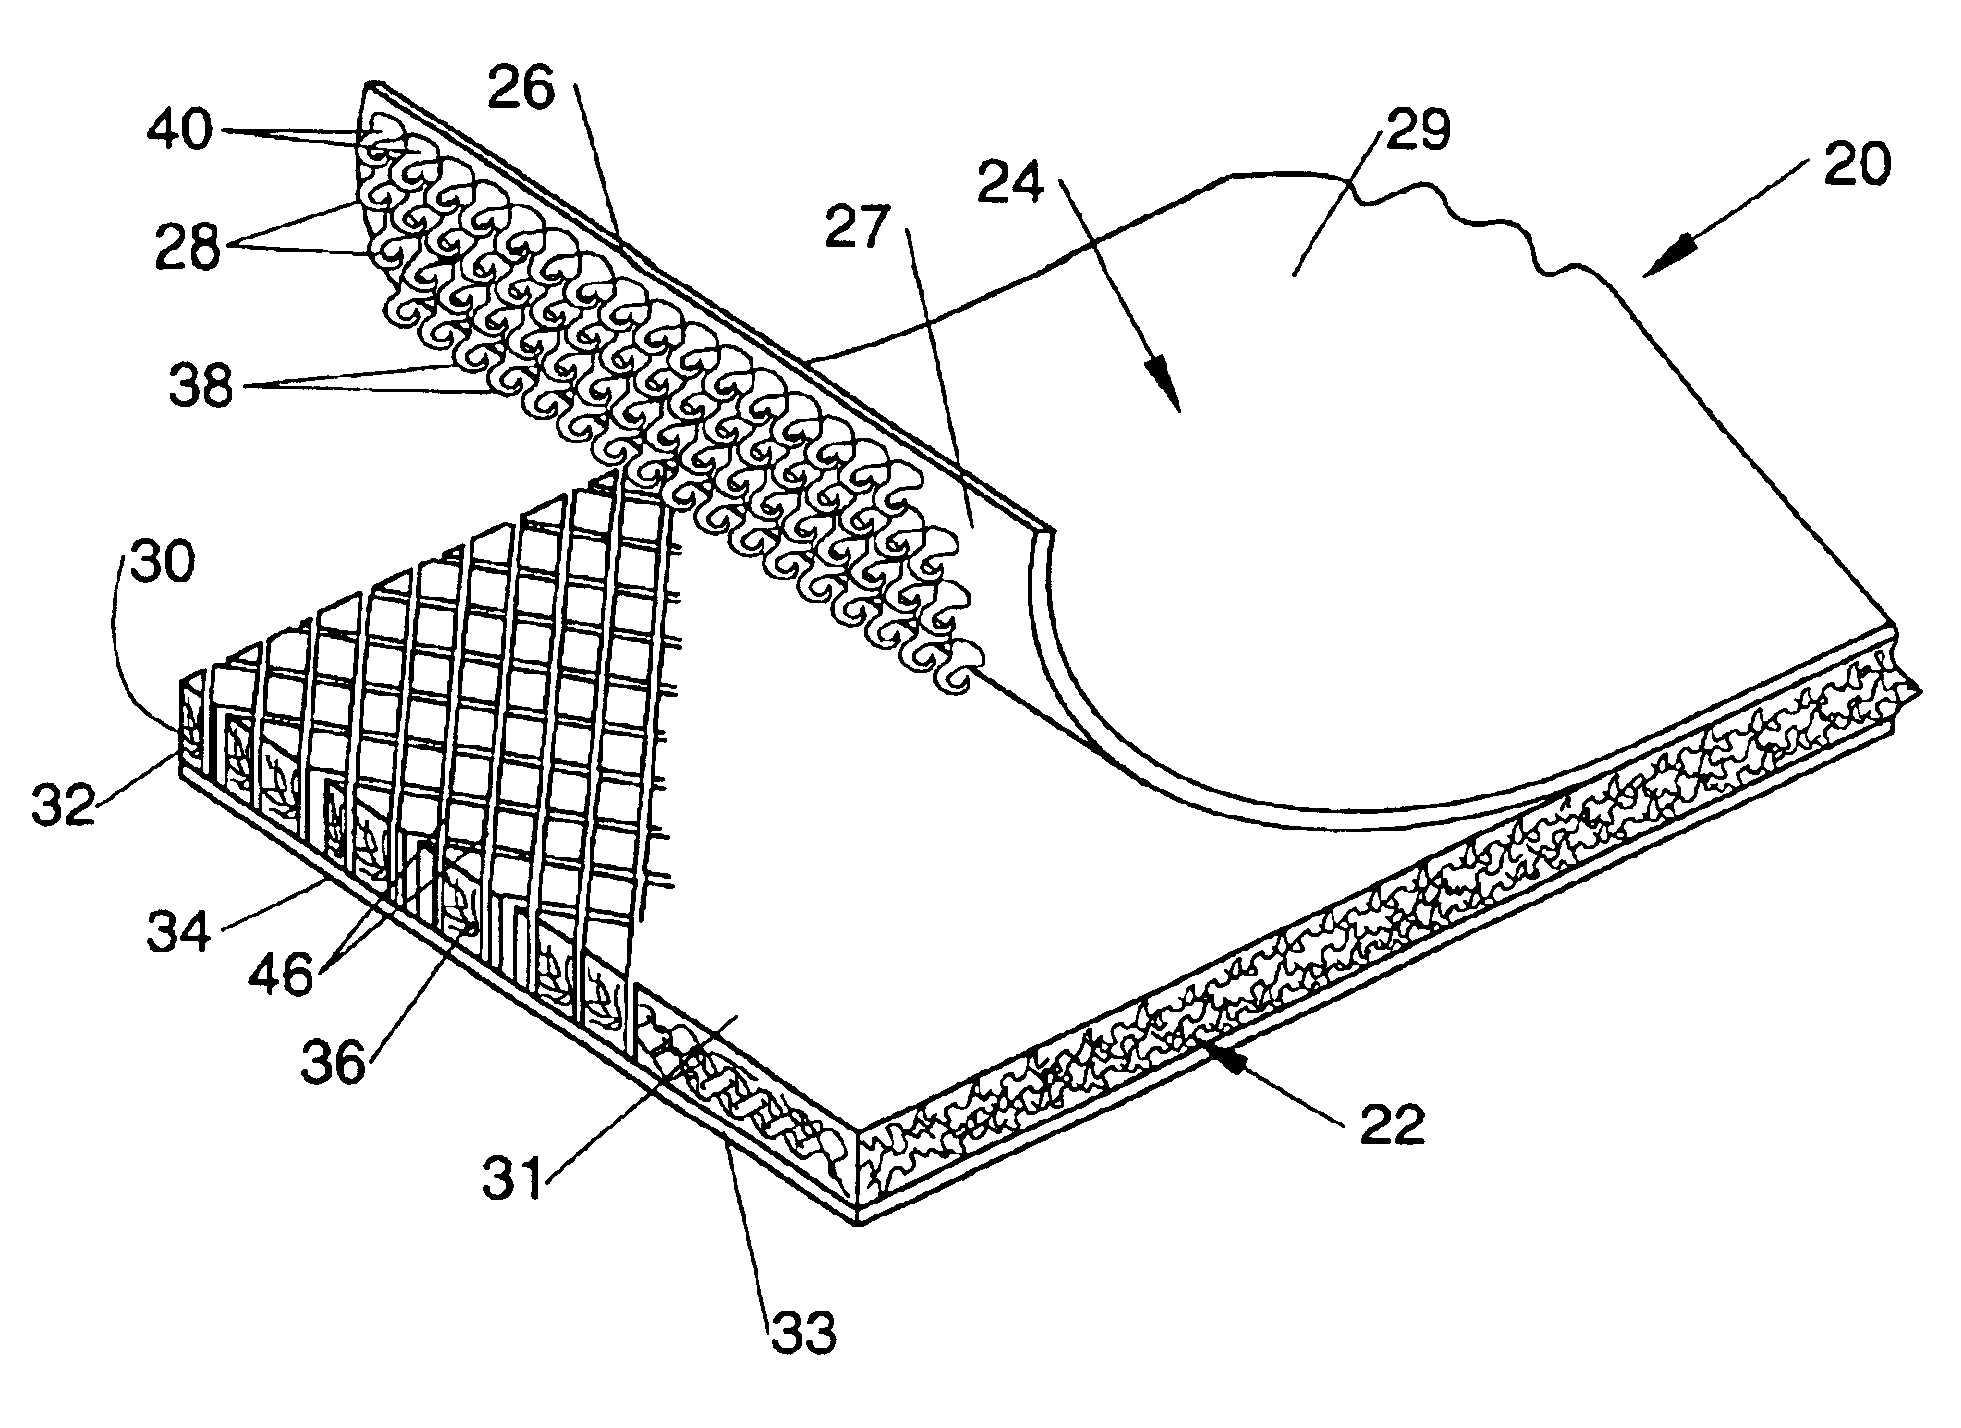 Method of making multi-layer female component for refastenable fastening device